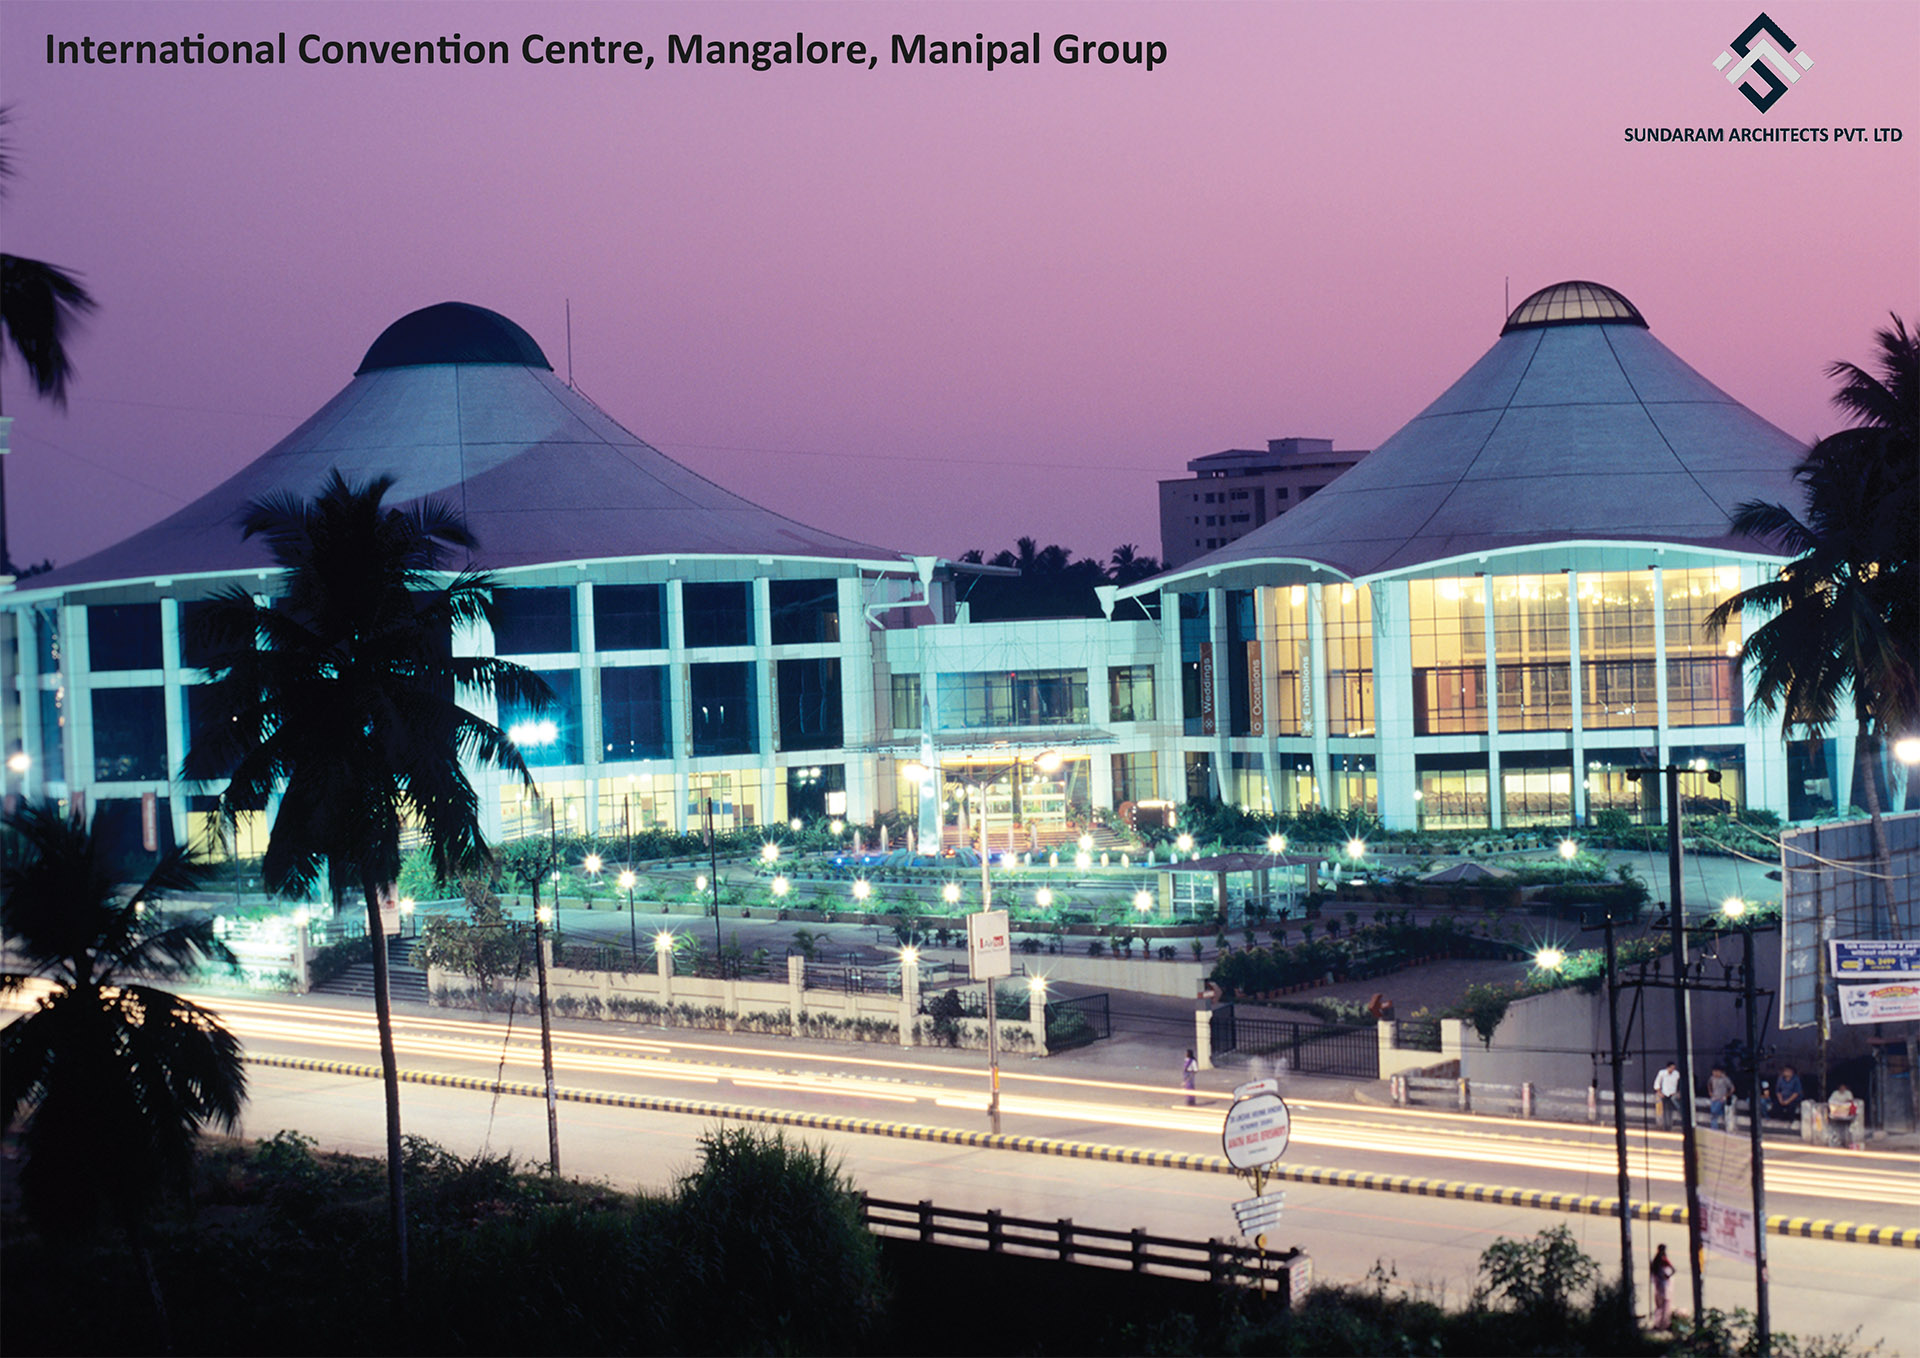 International Convention Centre, Mangalore, Manipal group - Institutional & Education Design